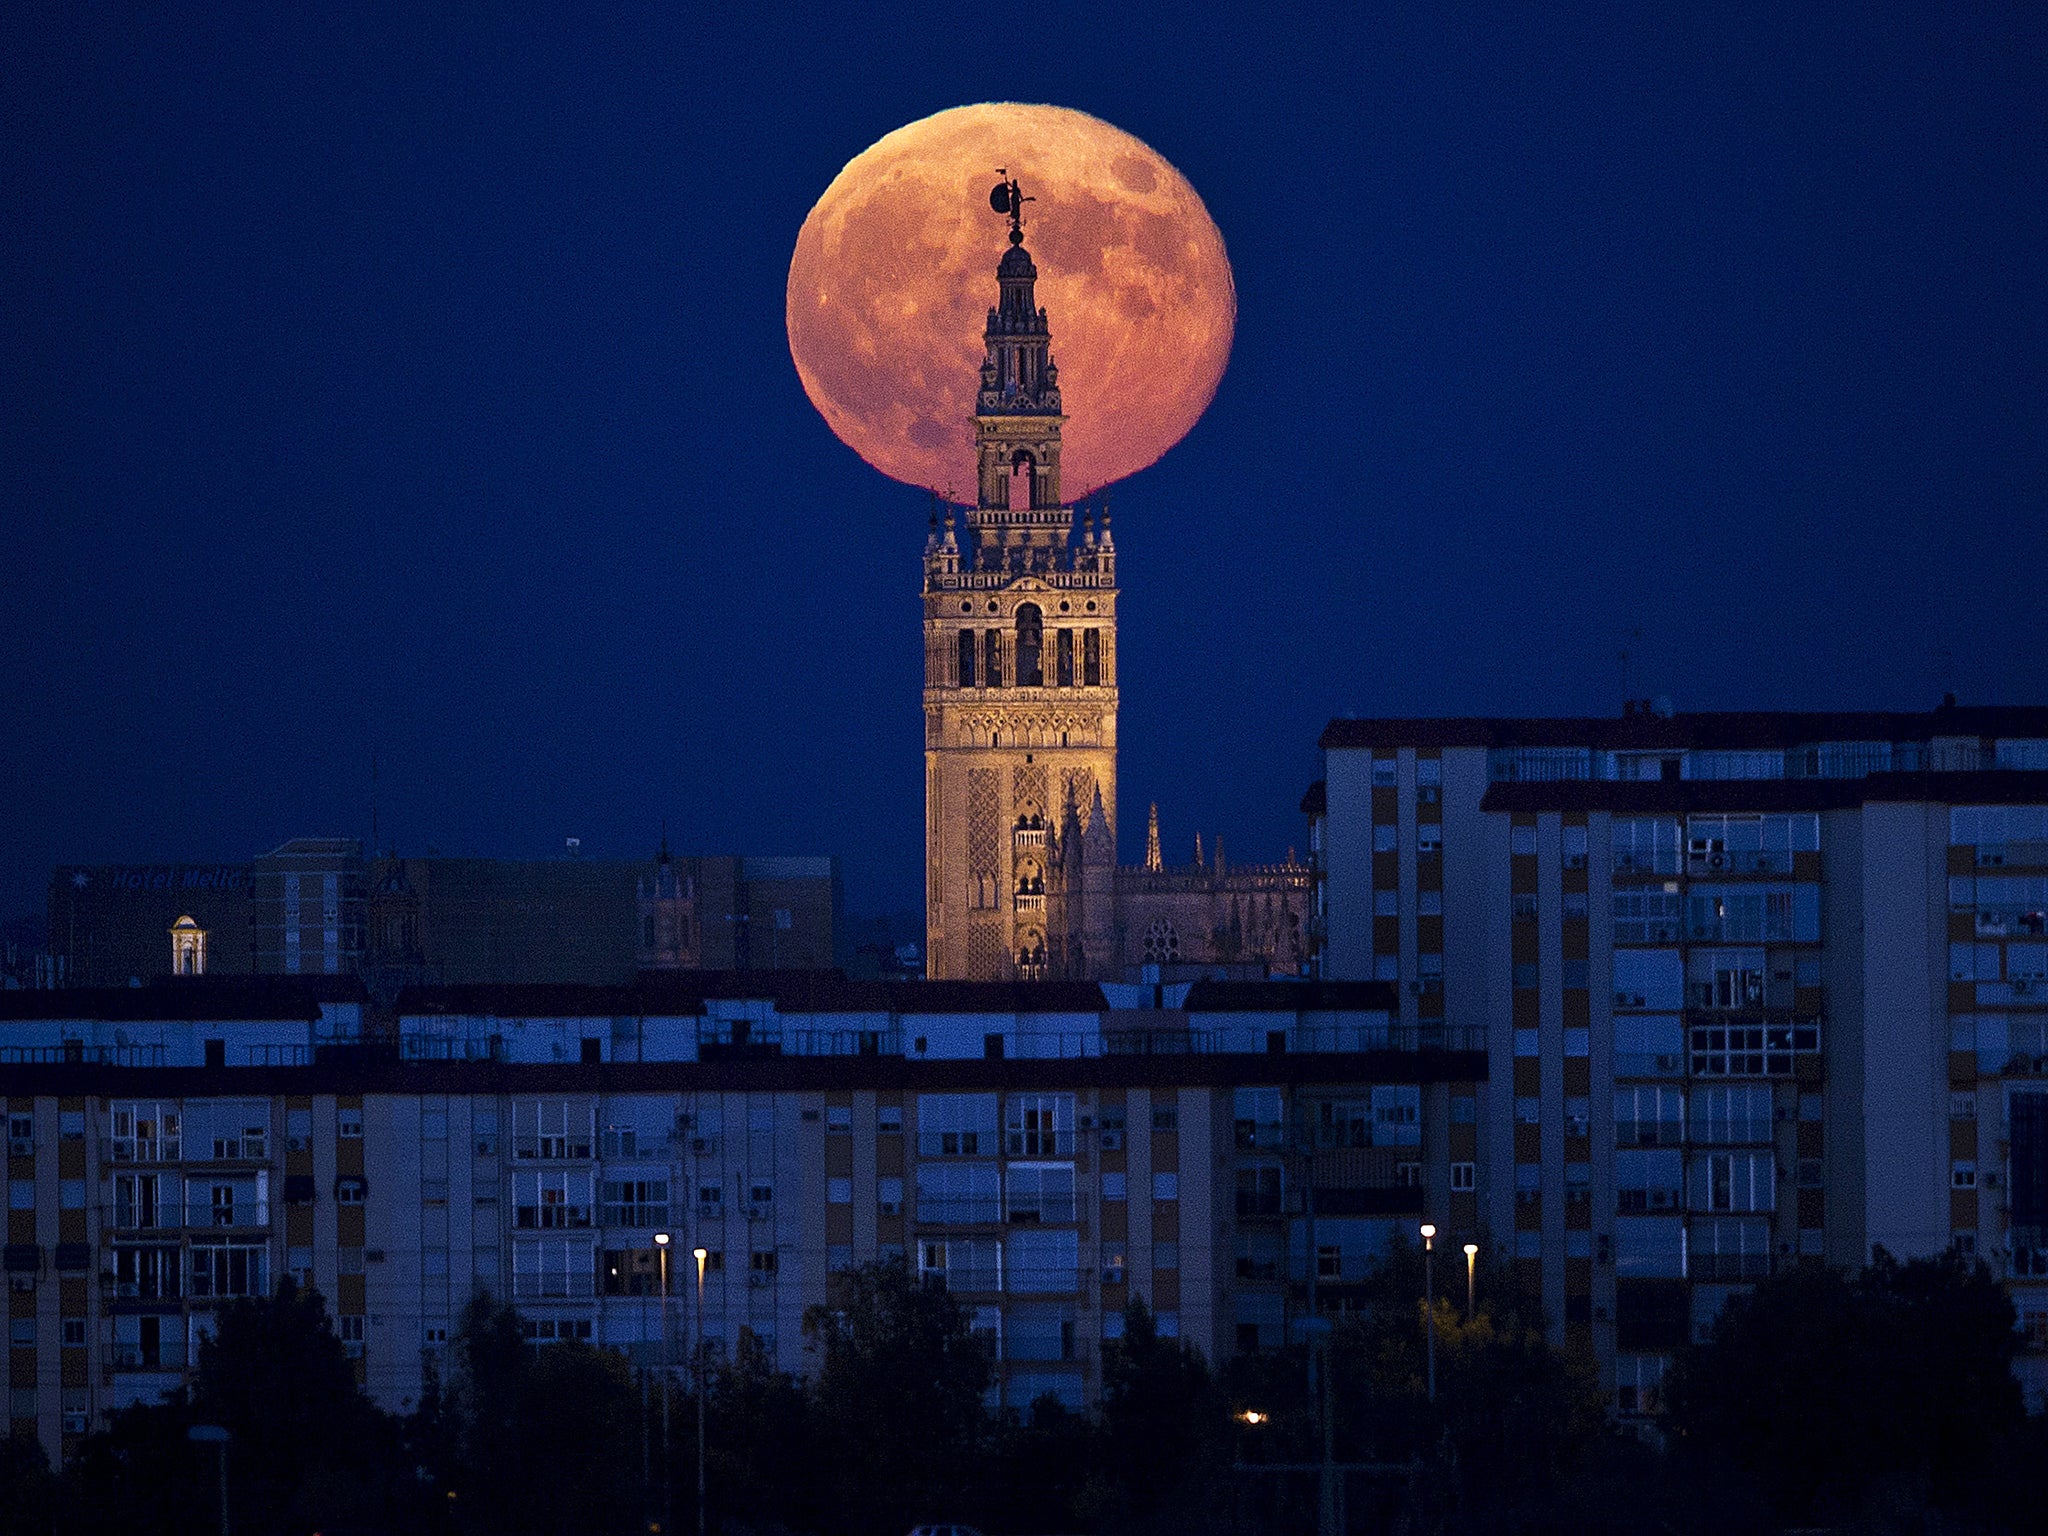 The moon rises over the Giralda, the tower of Seville's Cathedral 